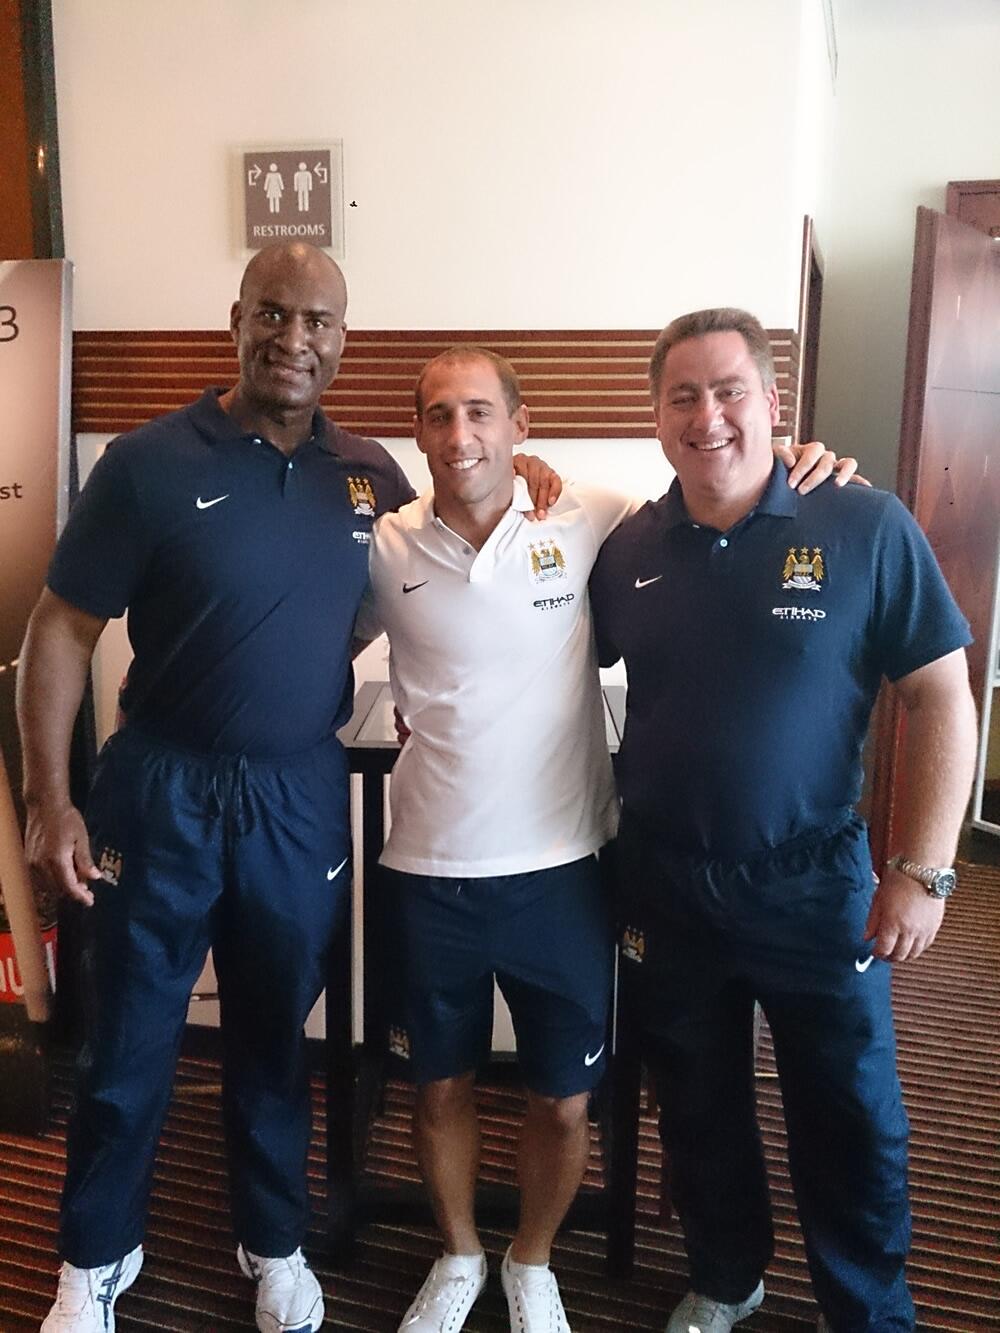 Manchester on Twitter: "BODYGUARDS: @Pablo_Zabaleta the #MCFC team's security Junior and Simon. Top blokes! #cityontour http://t.co/YQI9Q8wjlZ" / Twitter